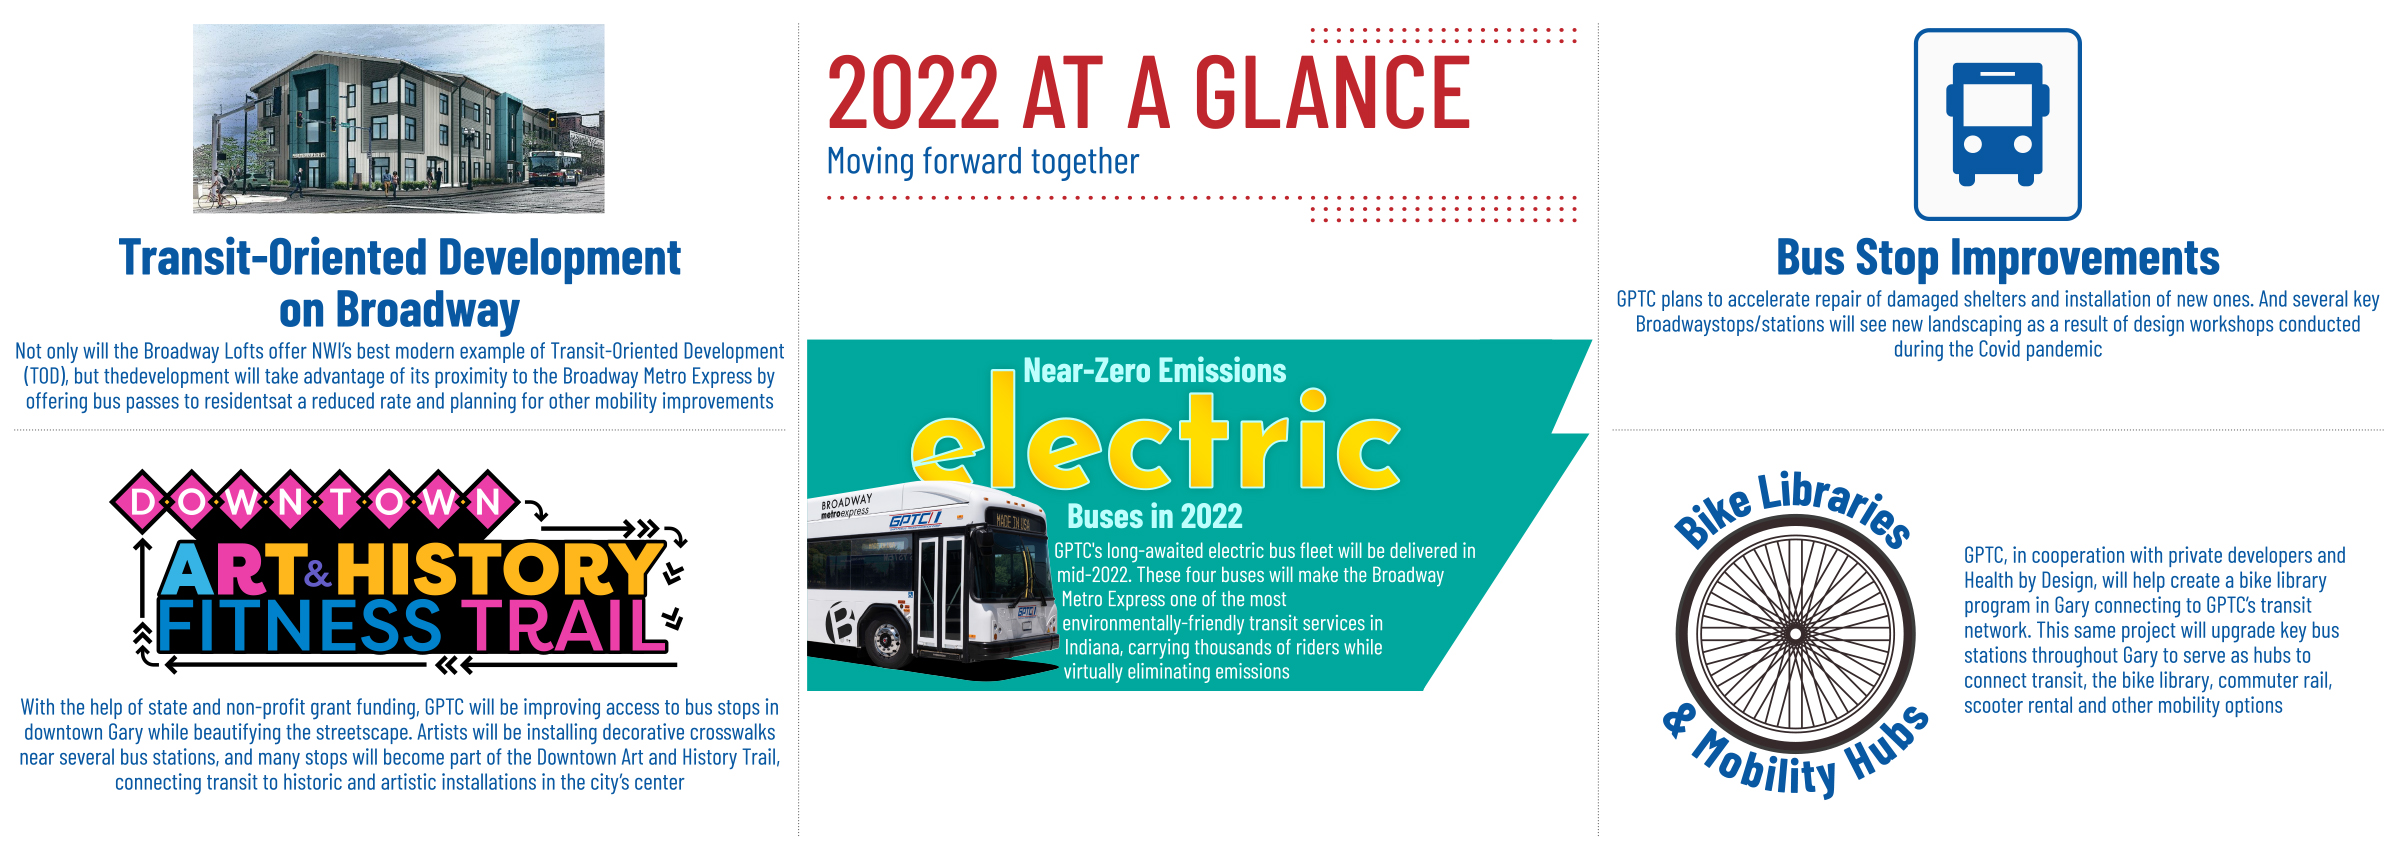 2022 At a Glance